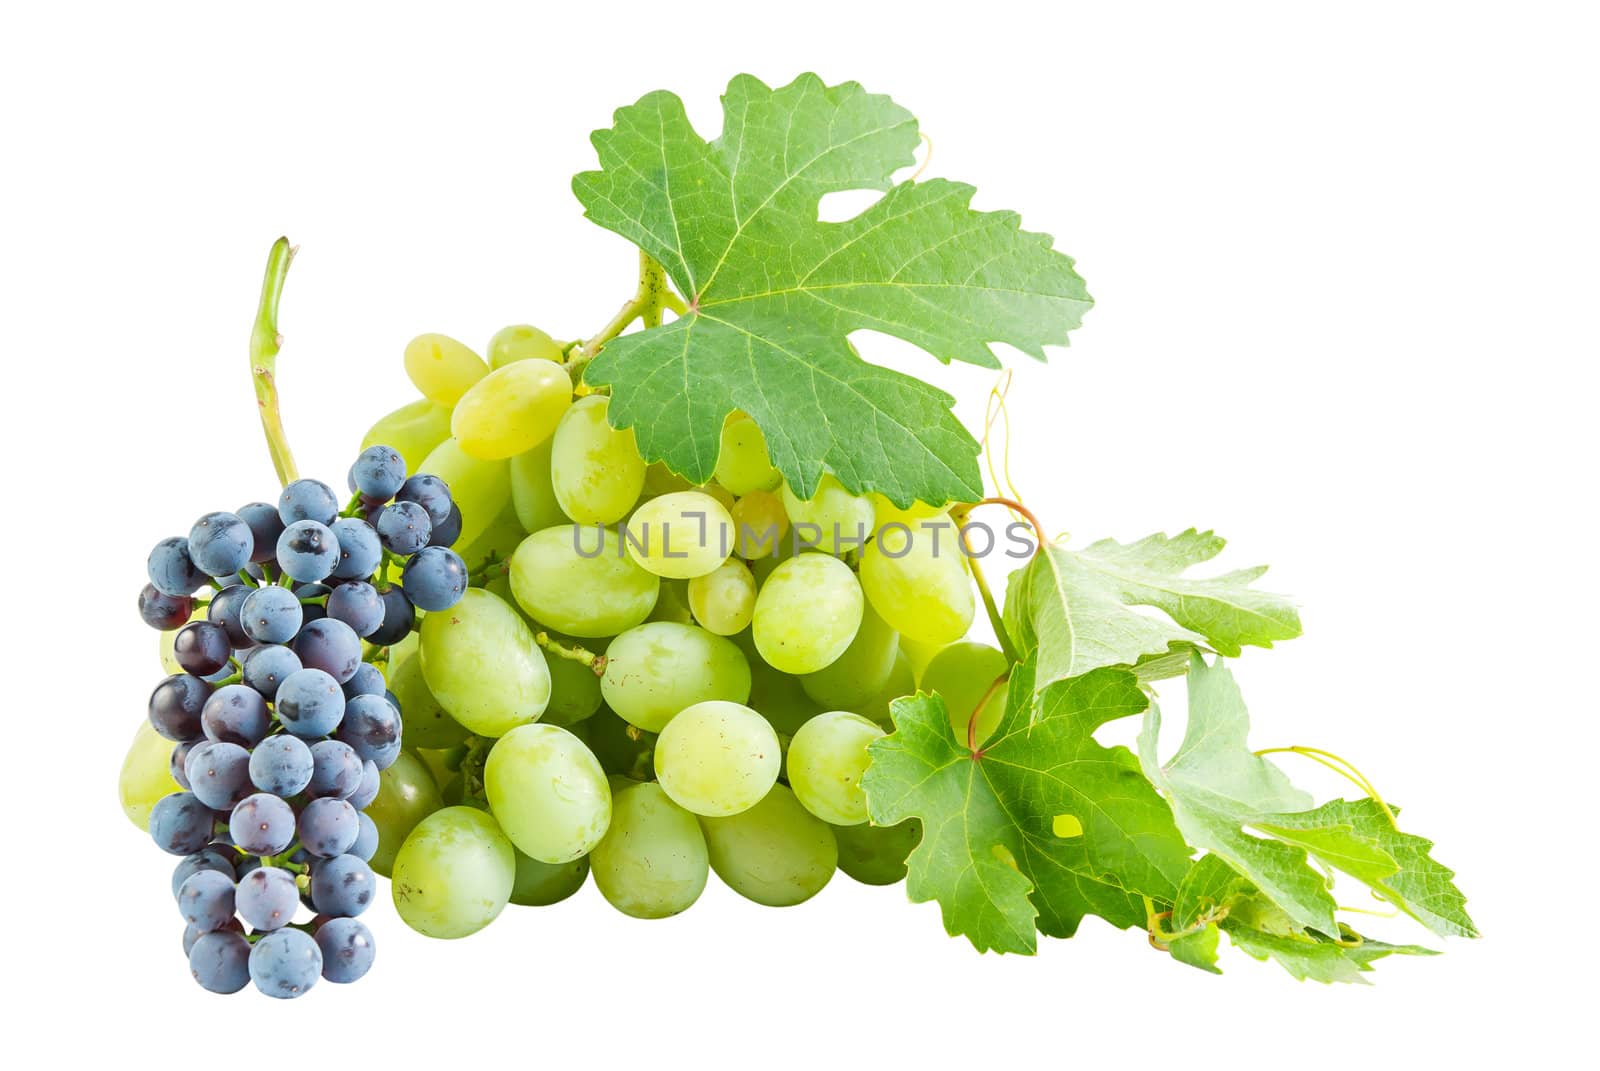 Ripe blue and green grapes with fresh leaves isolated on white background